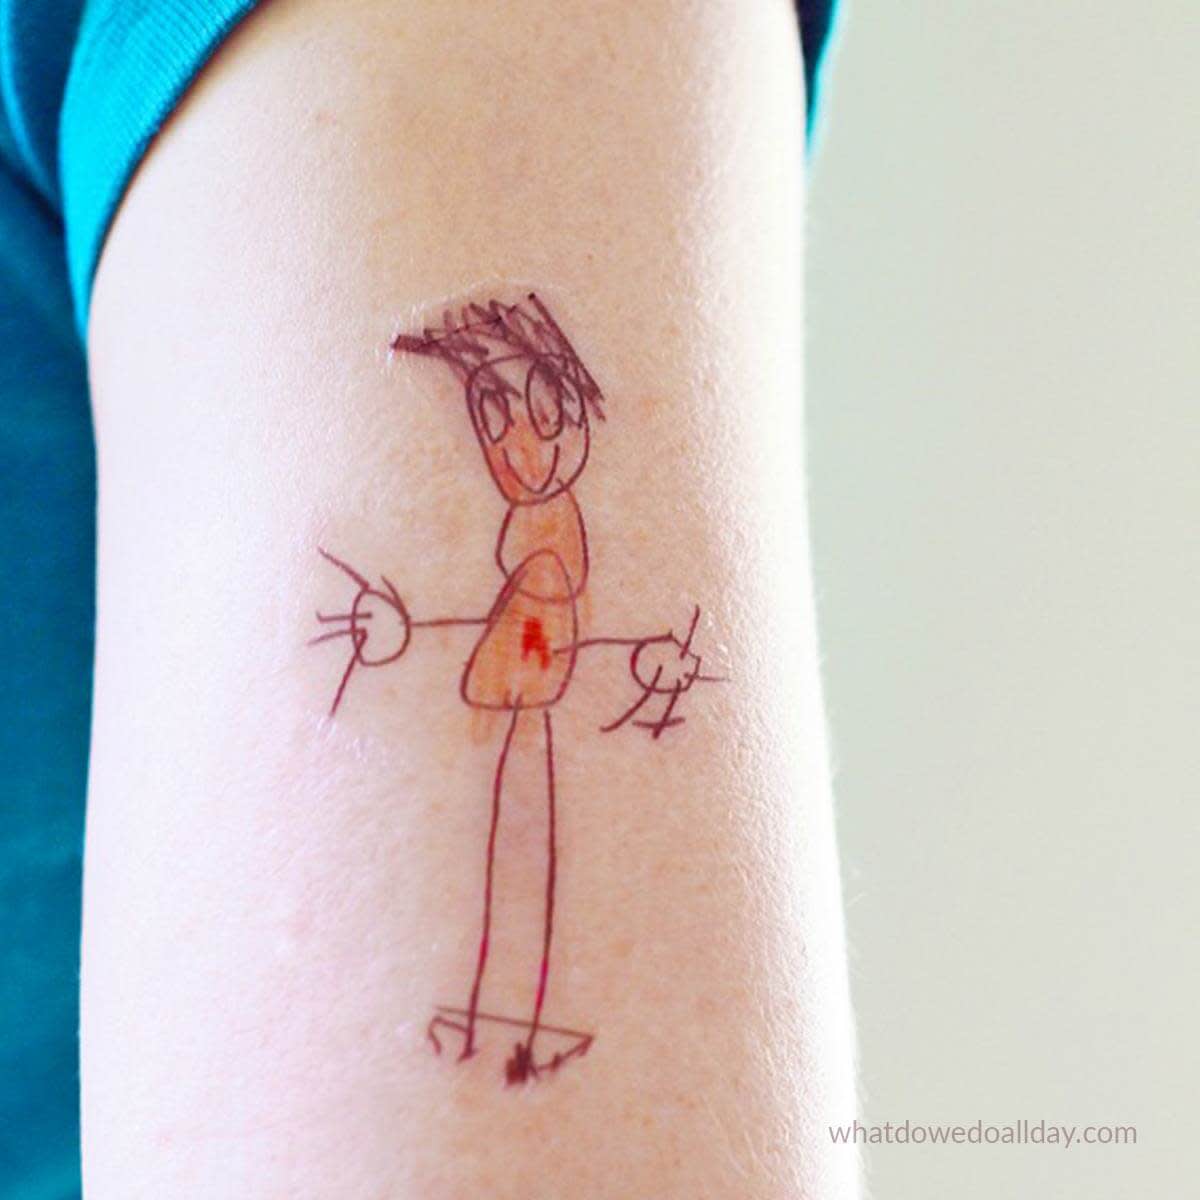 Invent It! Body Sticker Temporary Tattoo Kit Kids Create Your Own